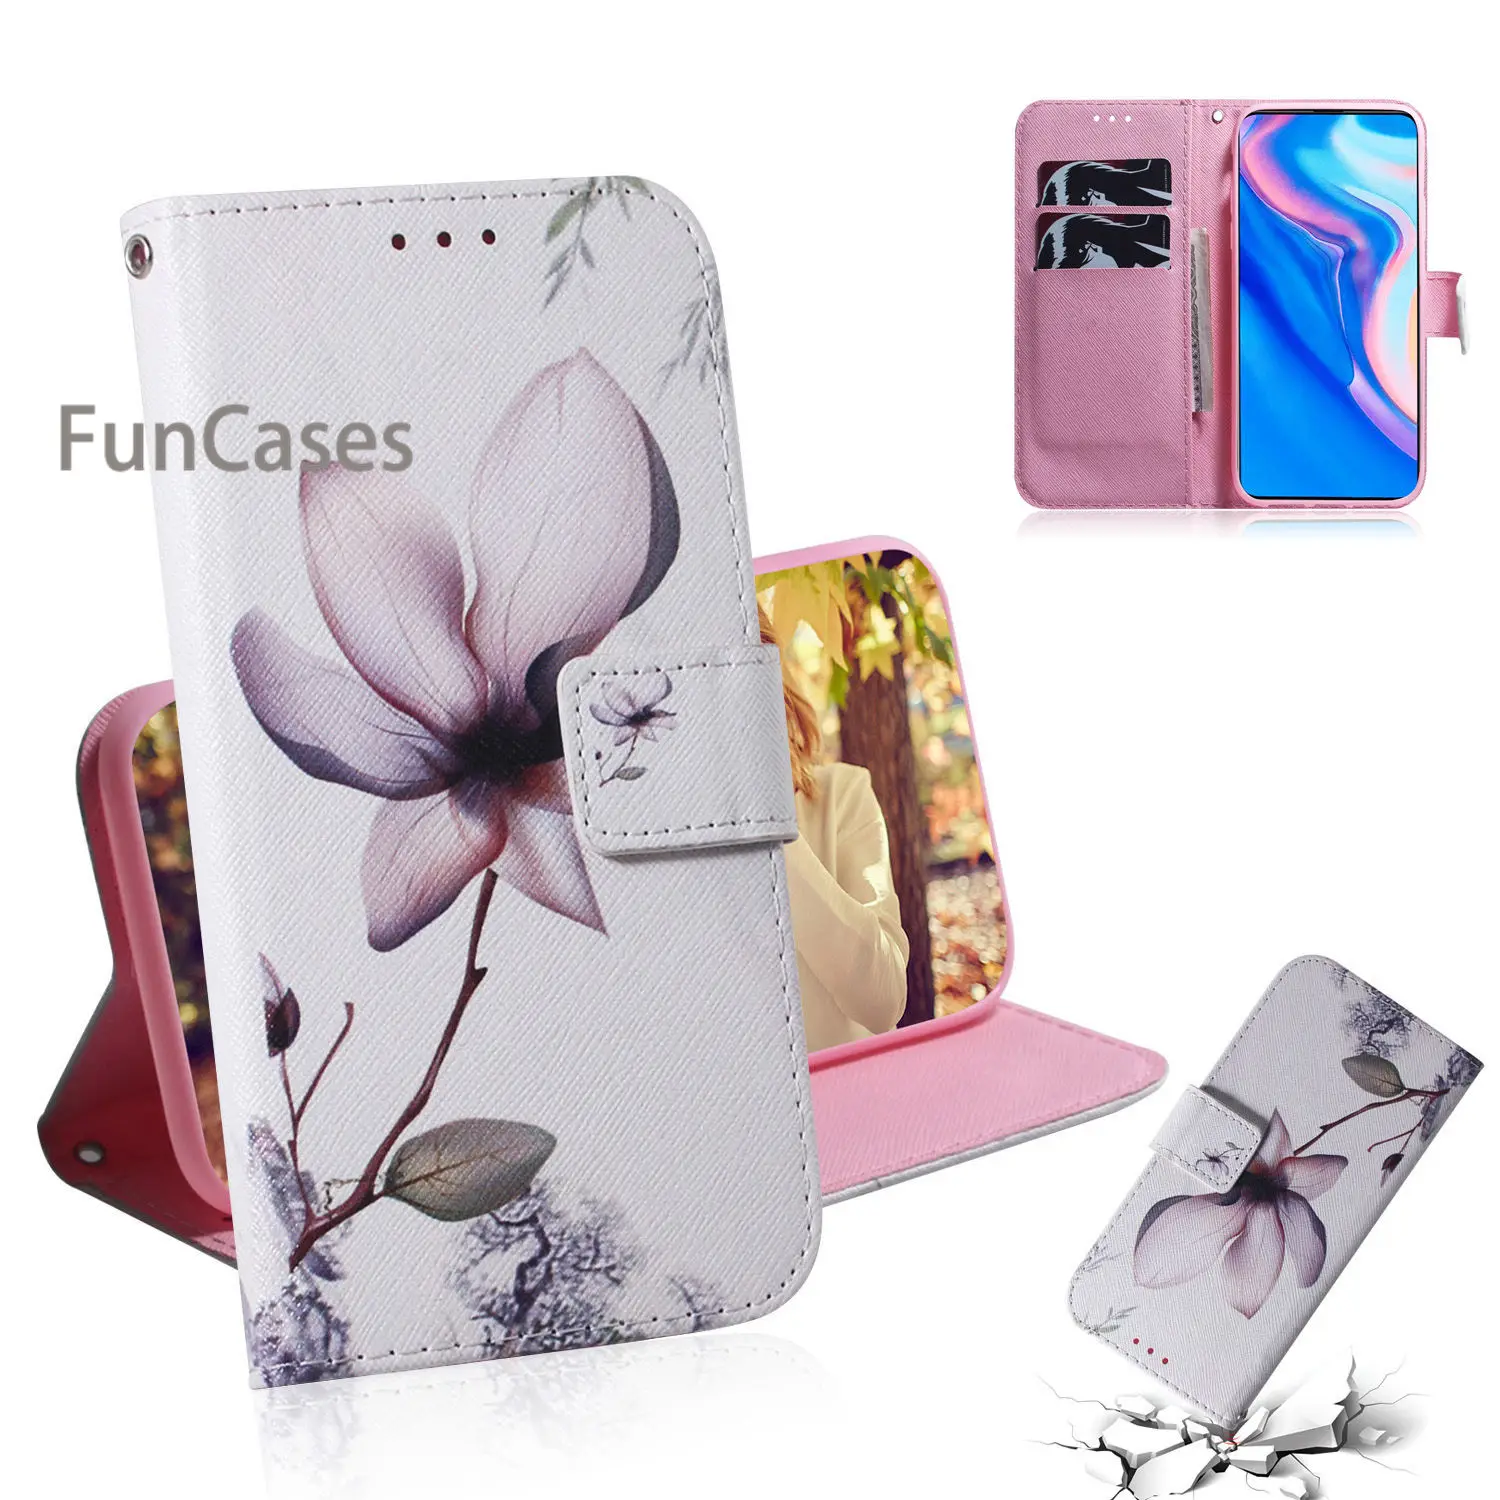 Animal PU Leather Flip Case For phone case Huawei Y9 Prime 2019 Carcasa sFor Carcaso Huawei carcaso P Smart Z Smartphone Covers